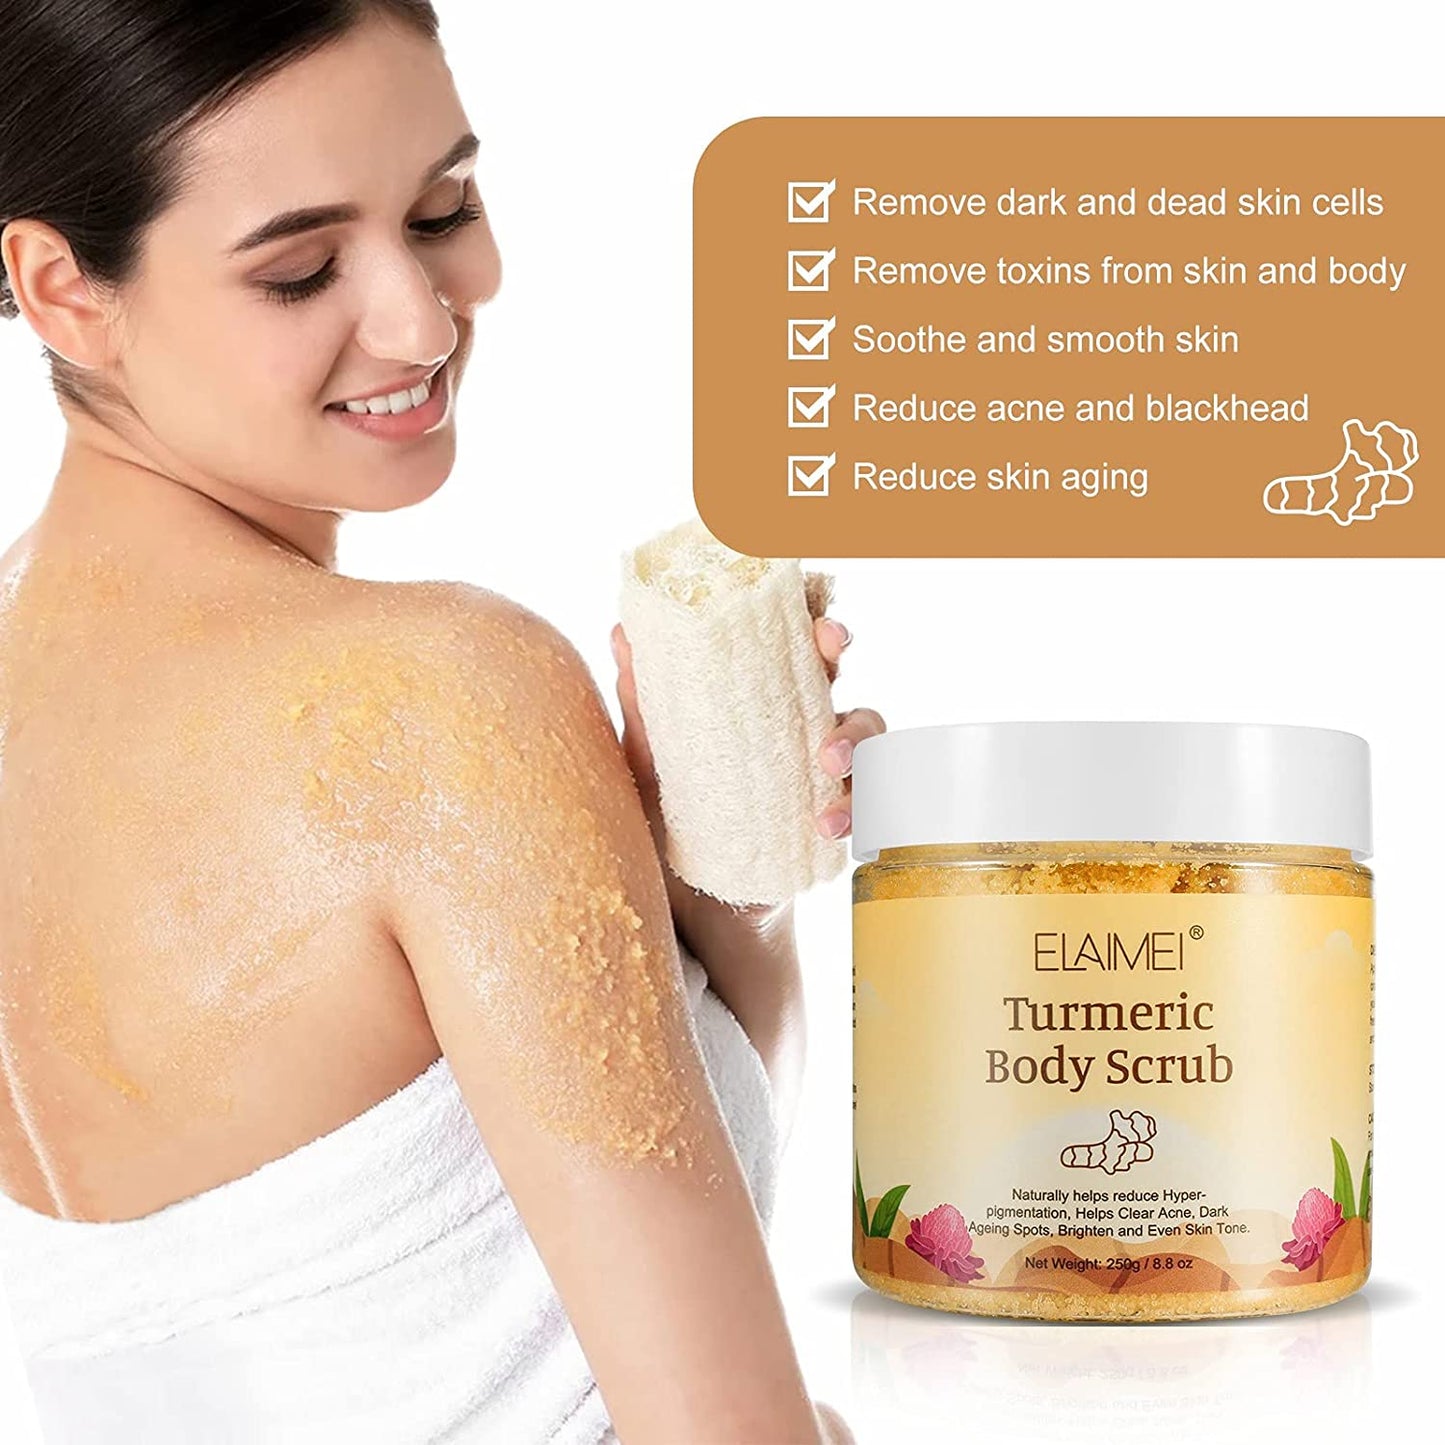 Elaimei Turmeric Body Scrub with Dead Sea Salt Moisturizing Nourishing Skin Anti-Aging Skin Exfoliating Detox for Reducing Pores, Clearing Acne, Smoothing, and Soothing Skin